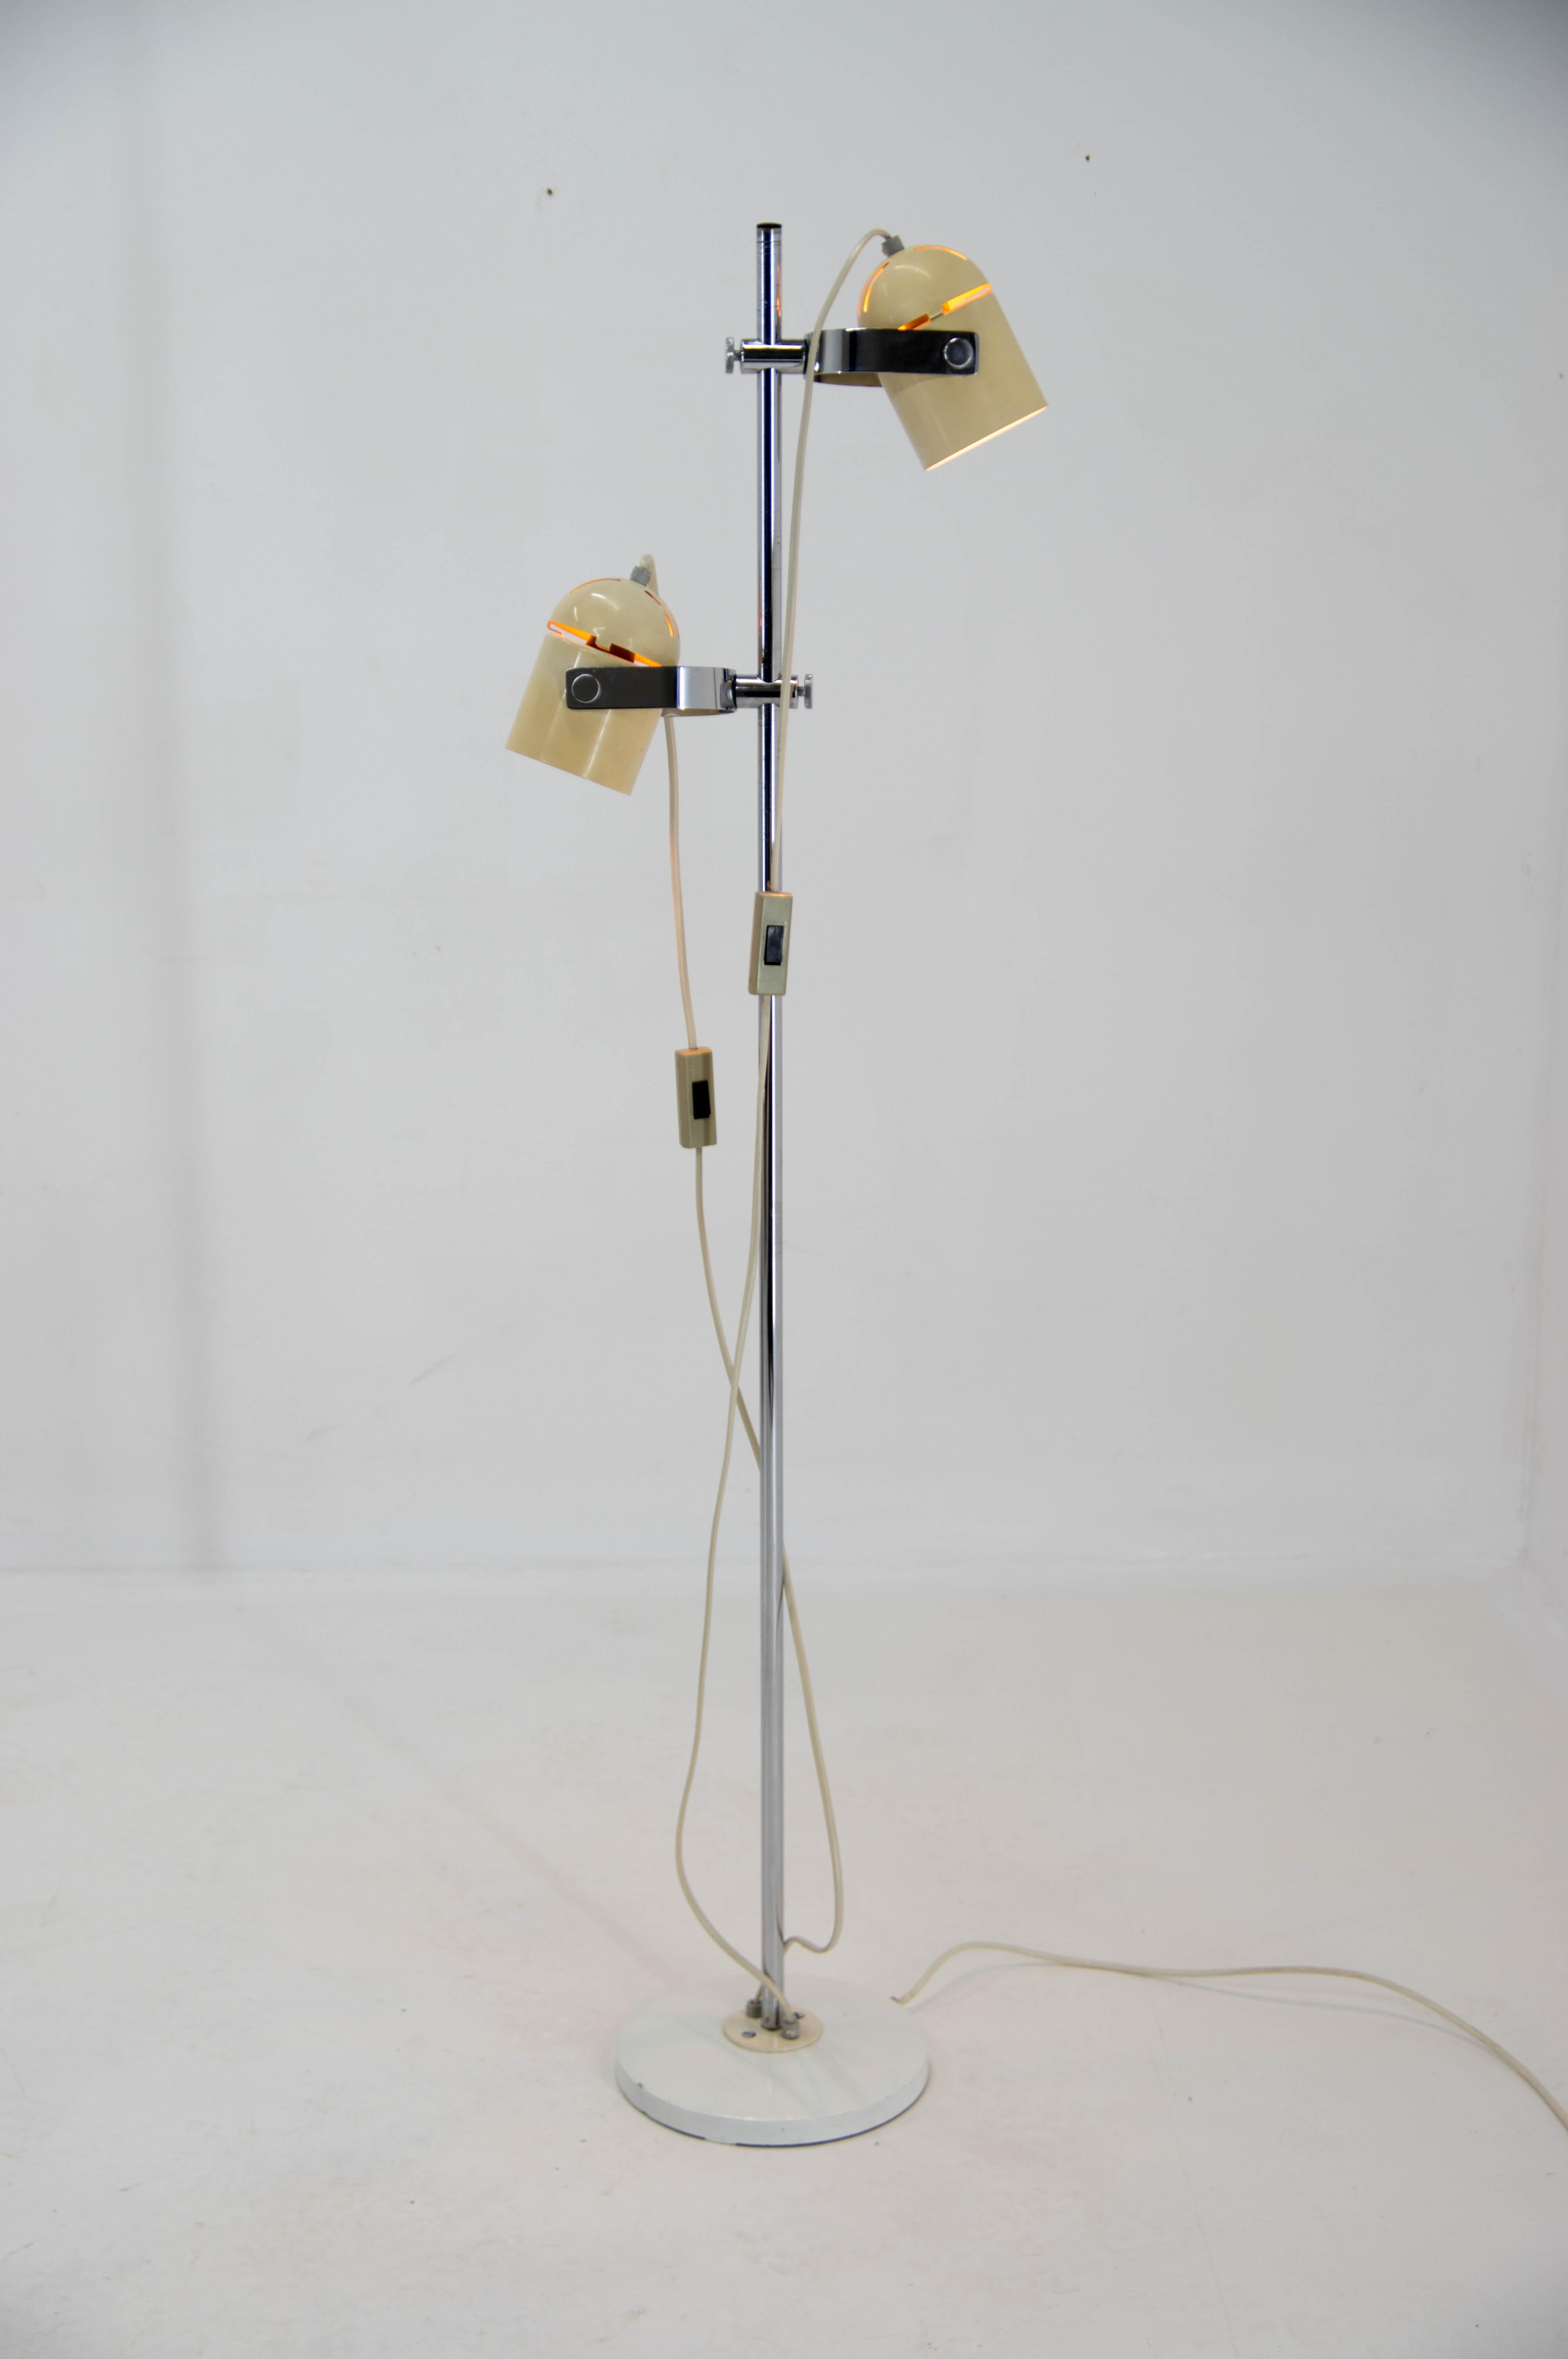 Ivory color floor lamp from the Combi Lux collection, designed by Stanislav Indra in the 1970's, manufactured by Lidokov Boskovice, chrome central bar with two independent spotlights, can be moved and rotated in height. Very good original